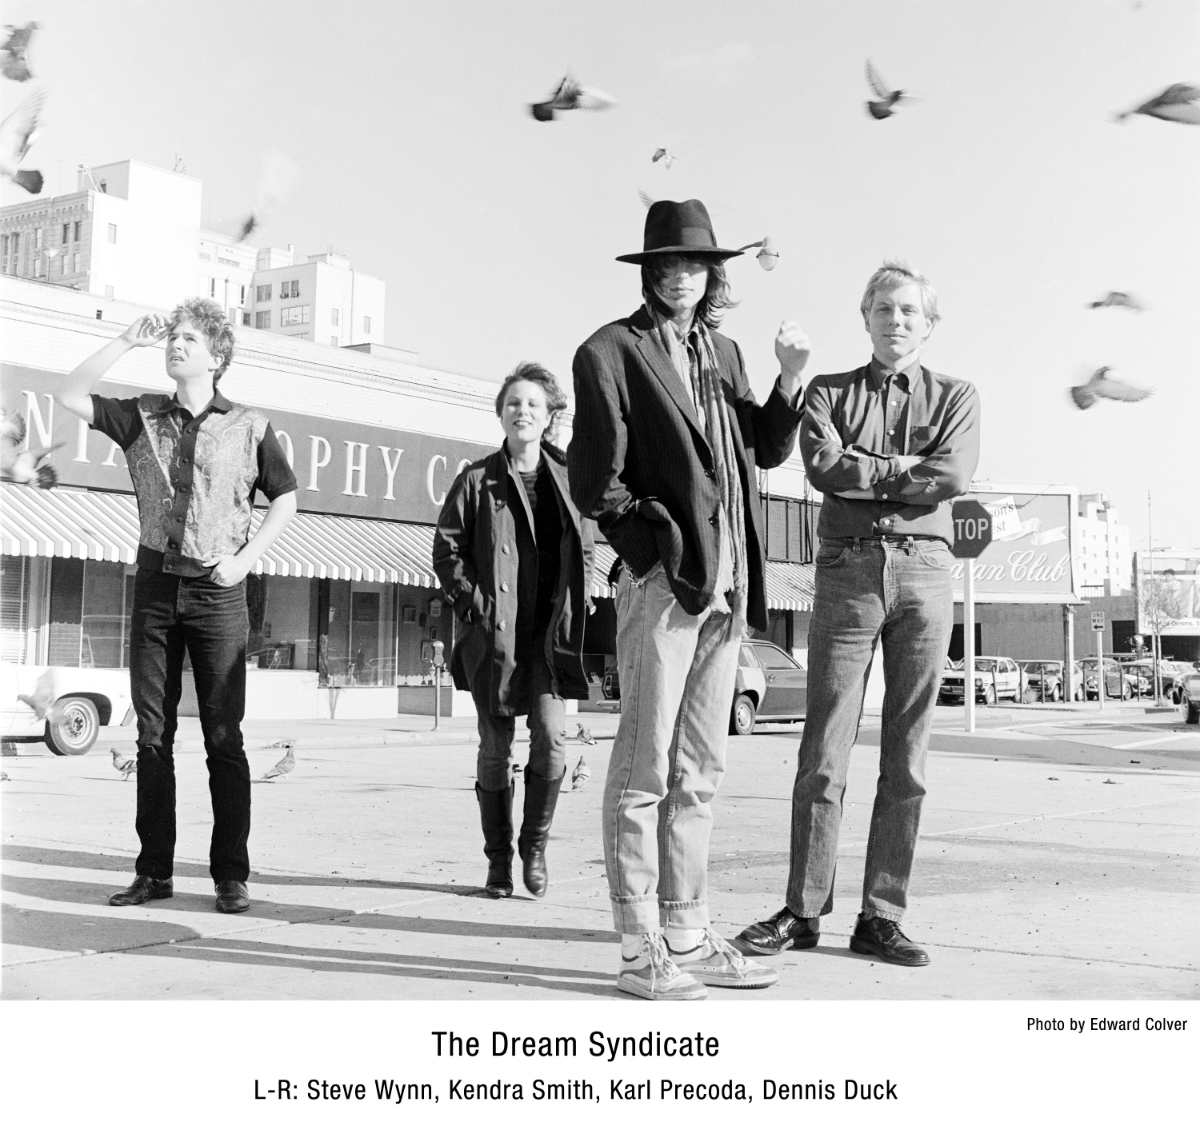 The Dream Syndicate, photo by Edward Colver